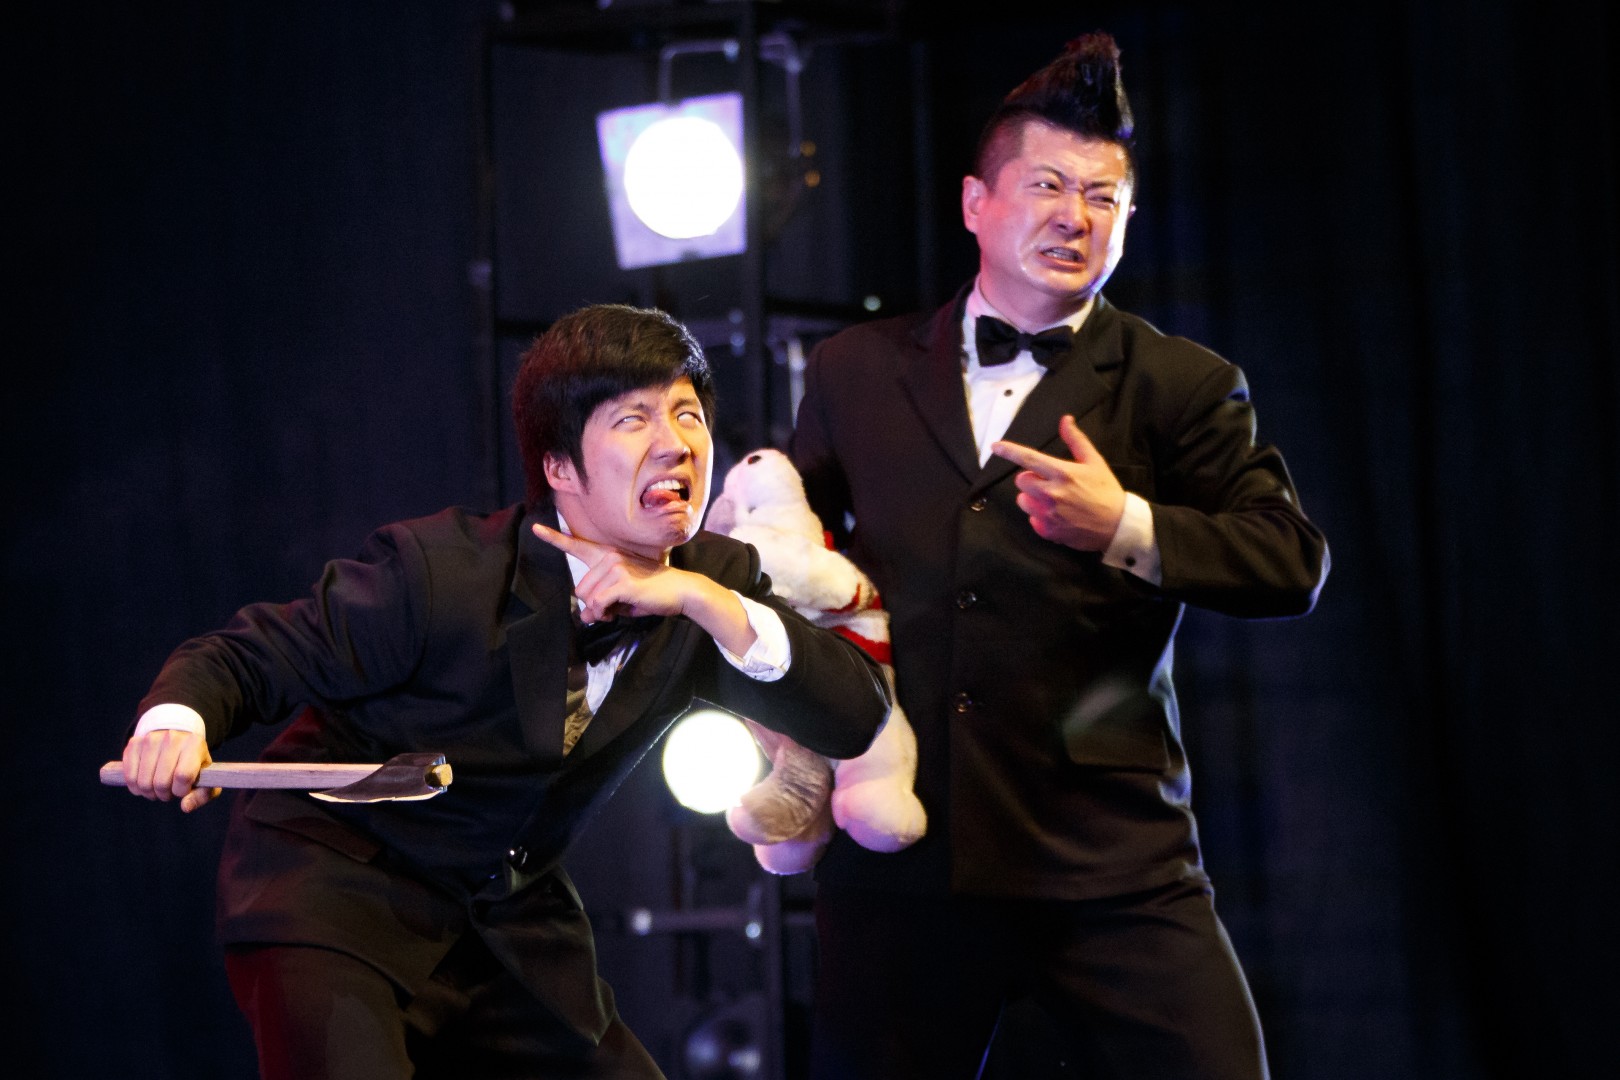 Chinese State Circus at Sala Palatului in Bucharest on March 10, 2016 (7f4c444379)